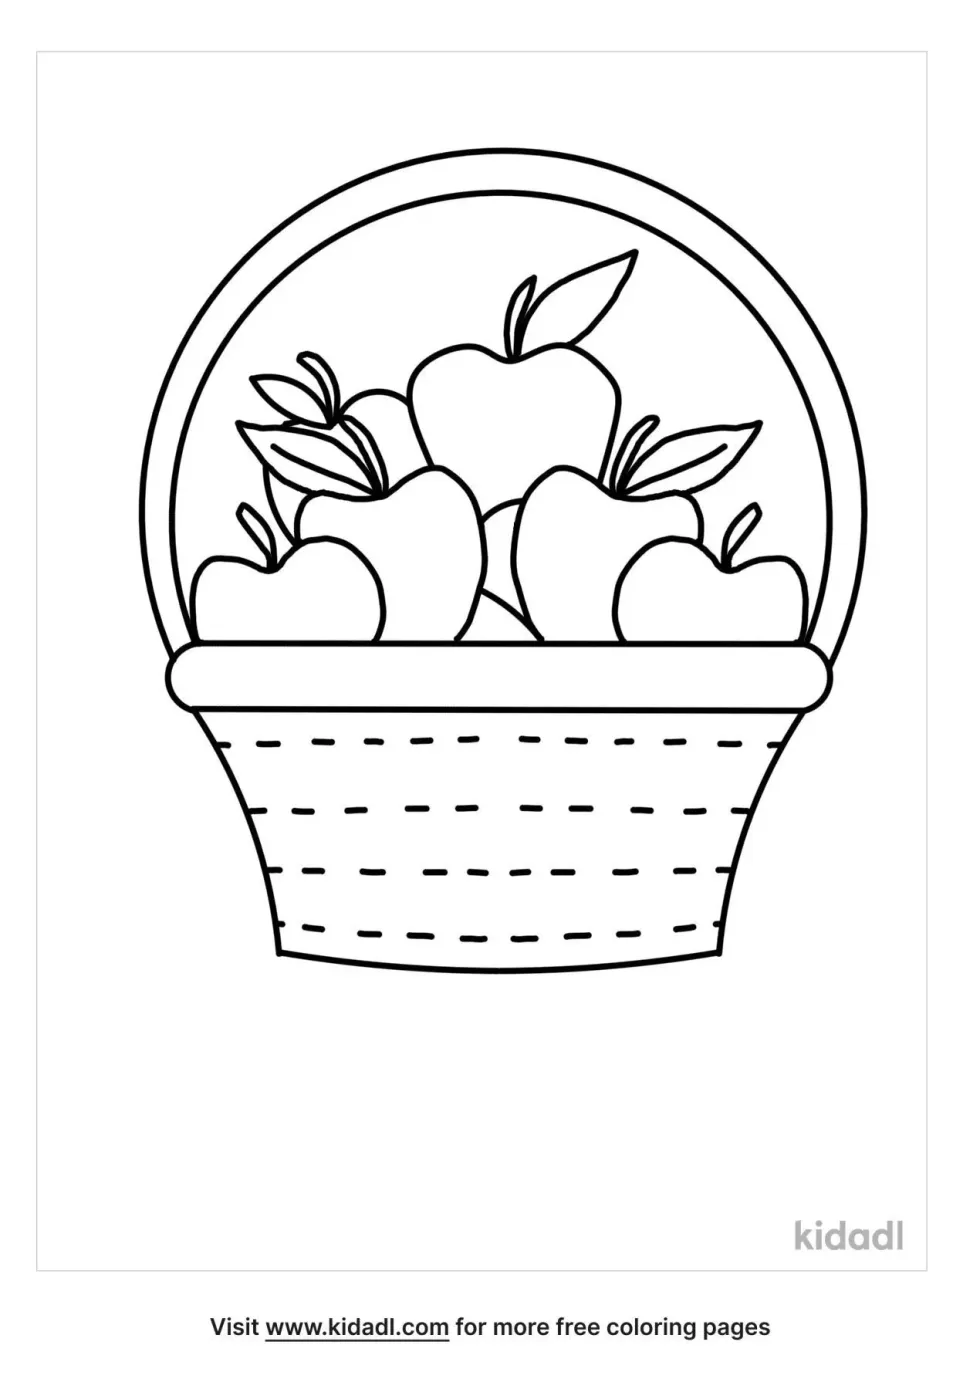 Apples In A Basket Coloring Page